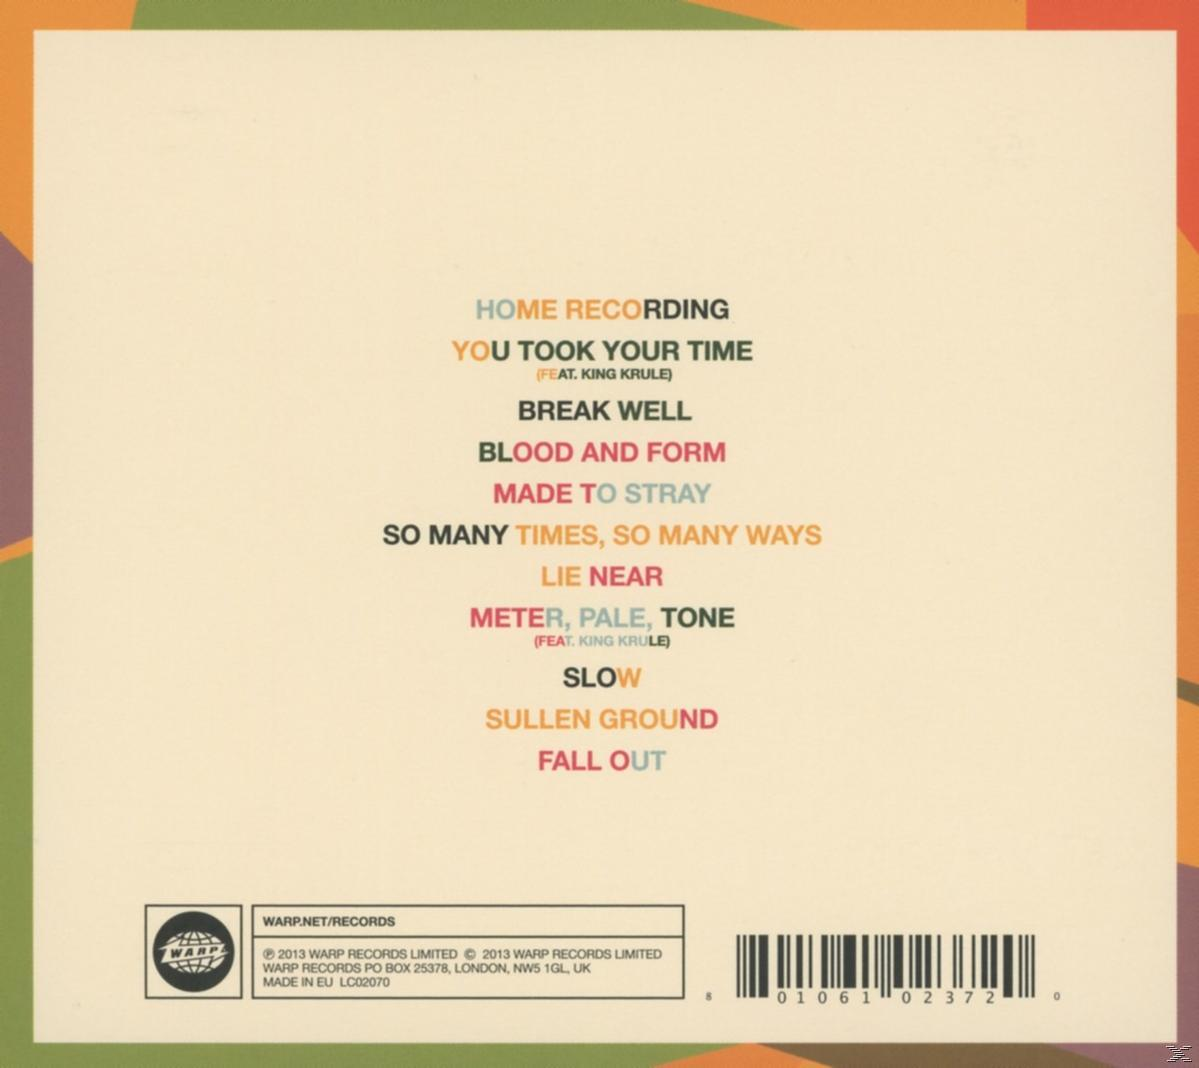 Less Kimbie (CD) Spring Fault Youth Cold - - Mount